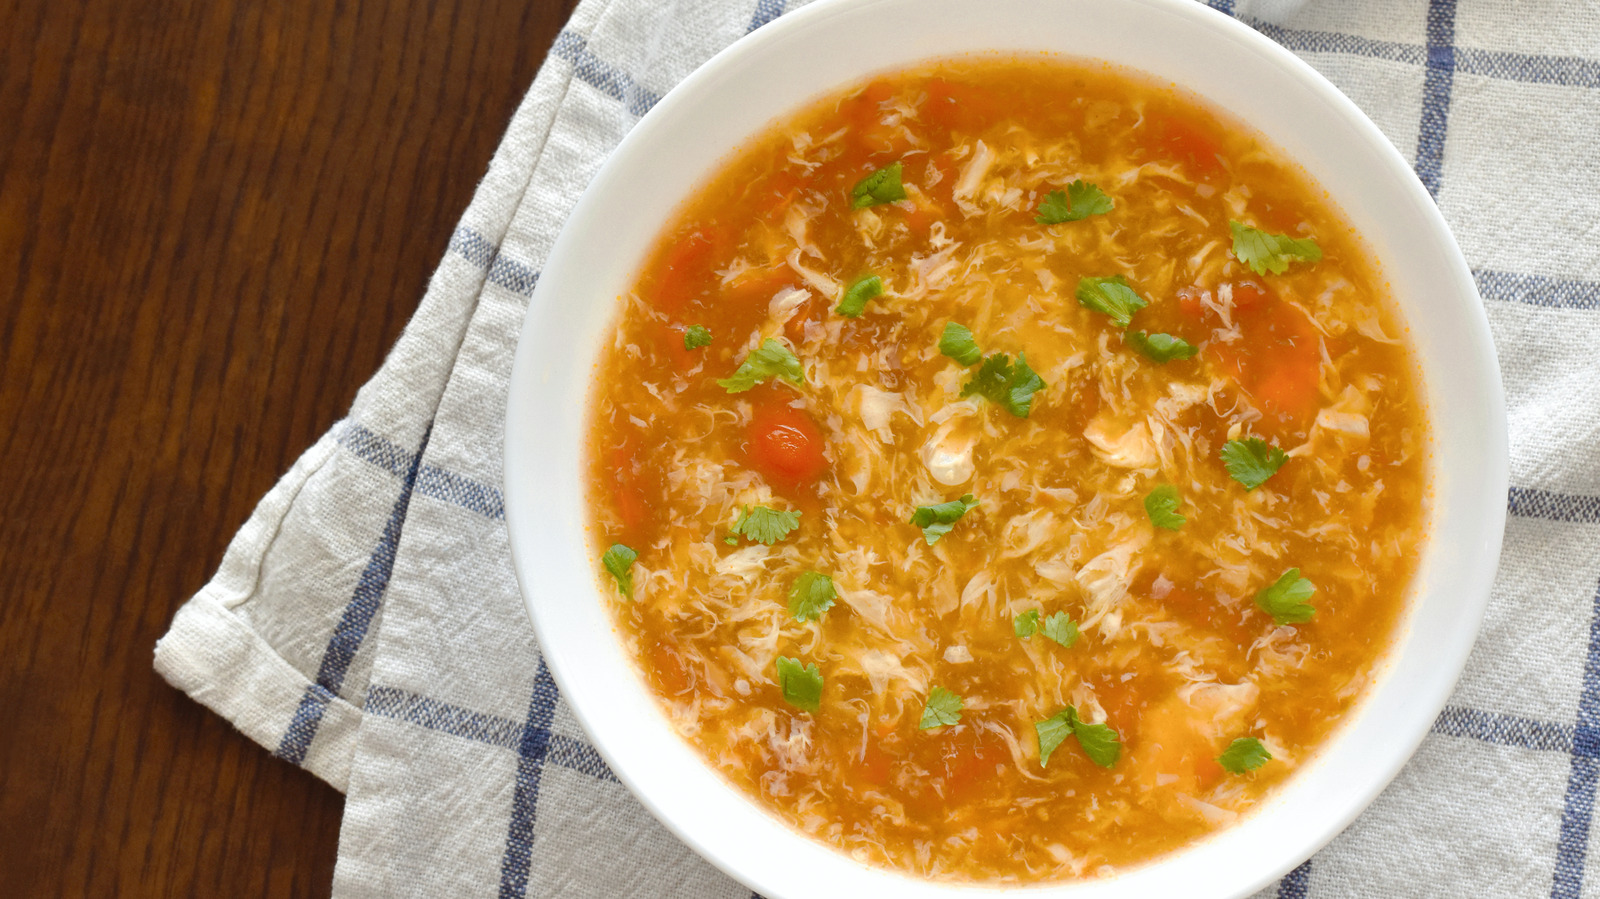 Add Tomato To Egg Drop Soup For A Variation Of The Classic Chinese Dish